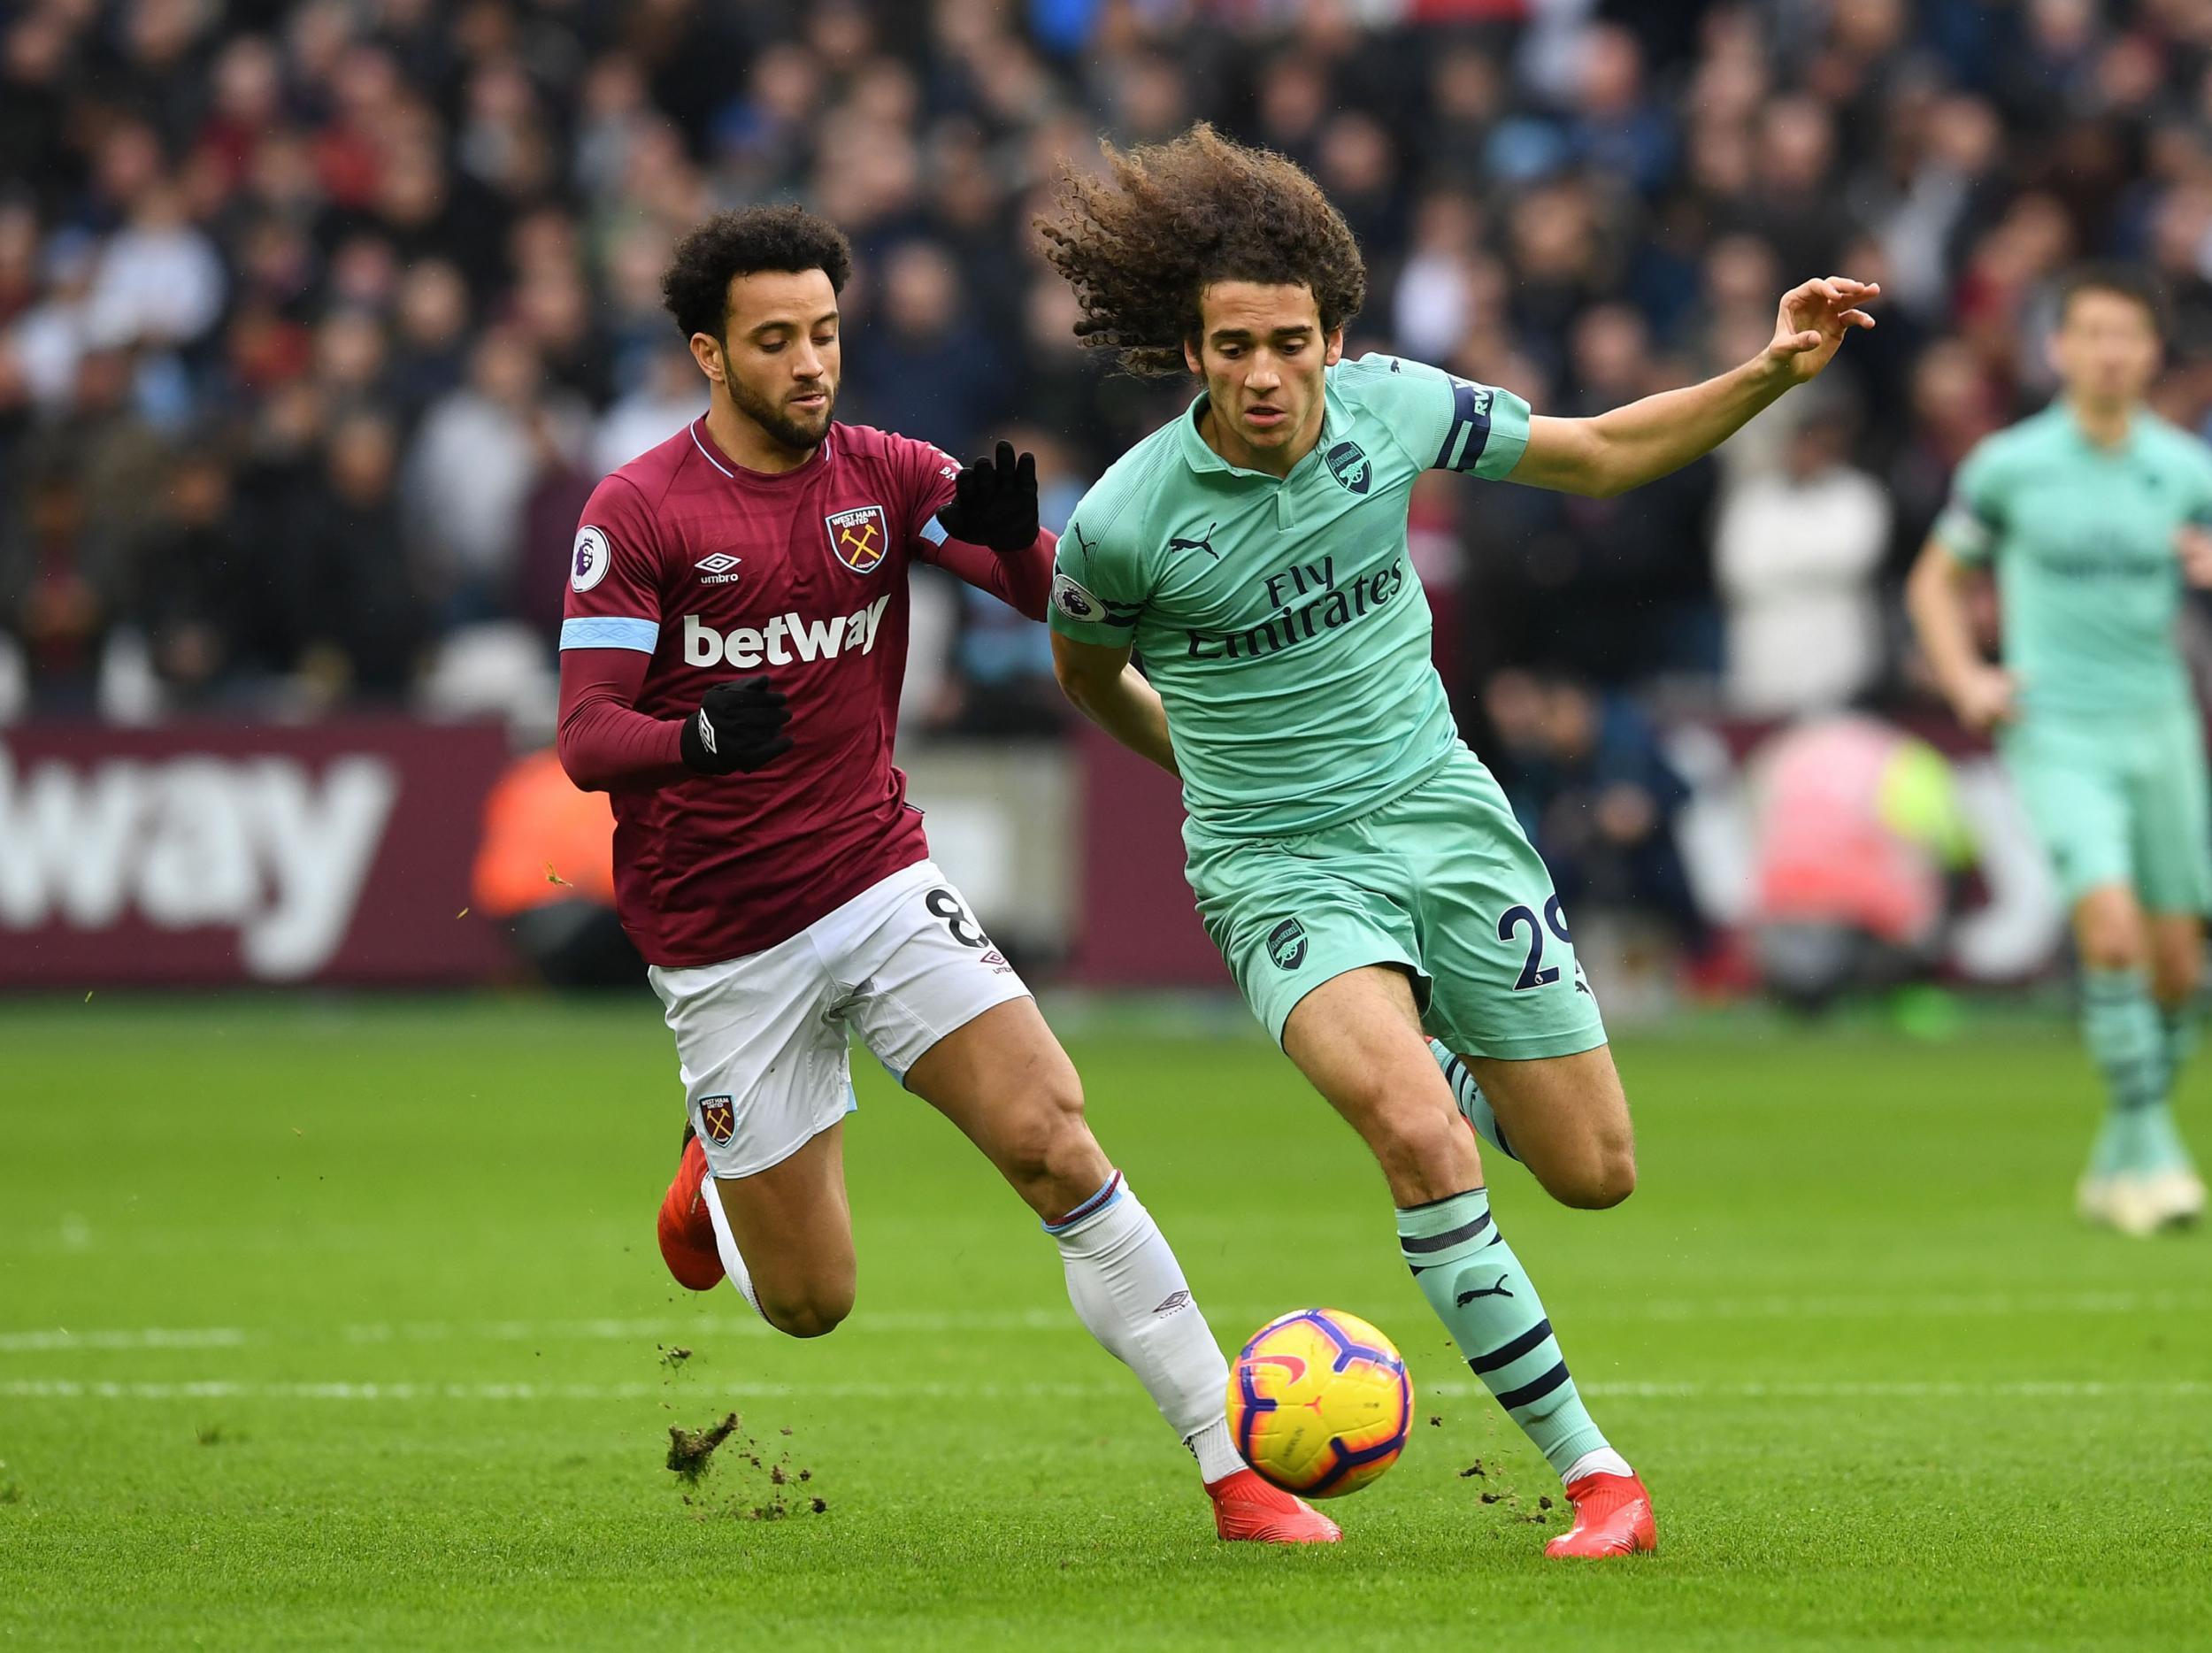 West Ham vs Arsenal live stream: How to watch match online and on TV